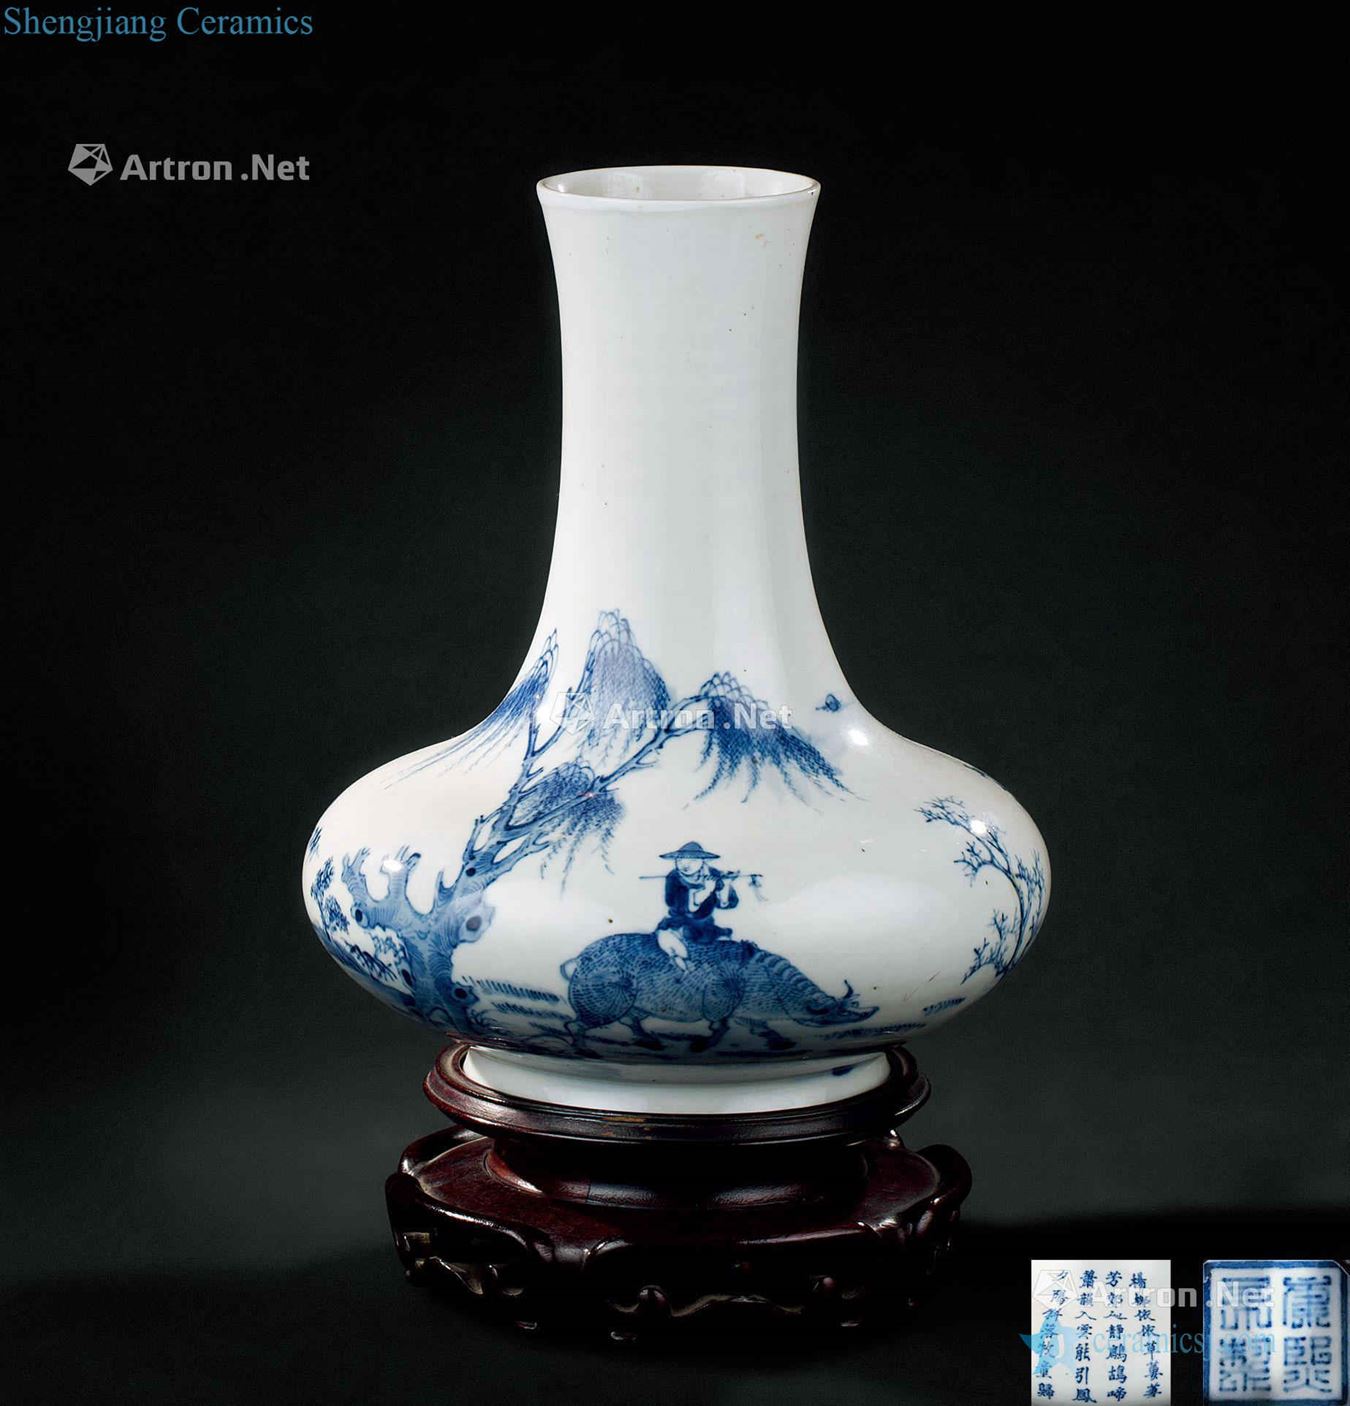 In the qing dynasty (1644-1911) blue and white lines of poetry and water bottles